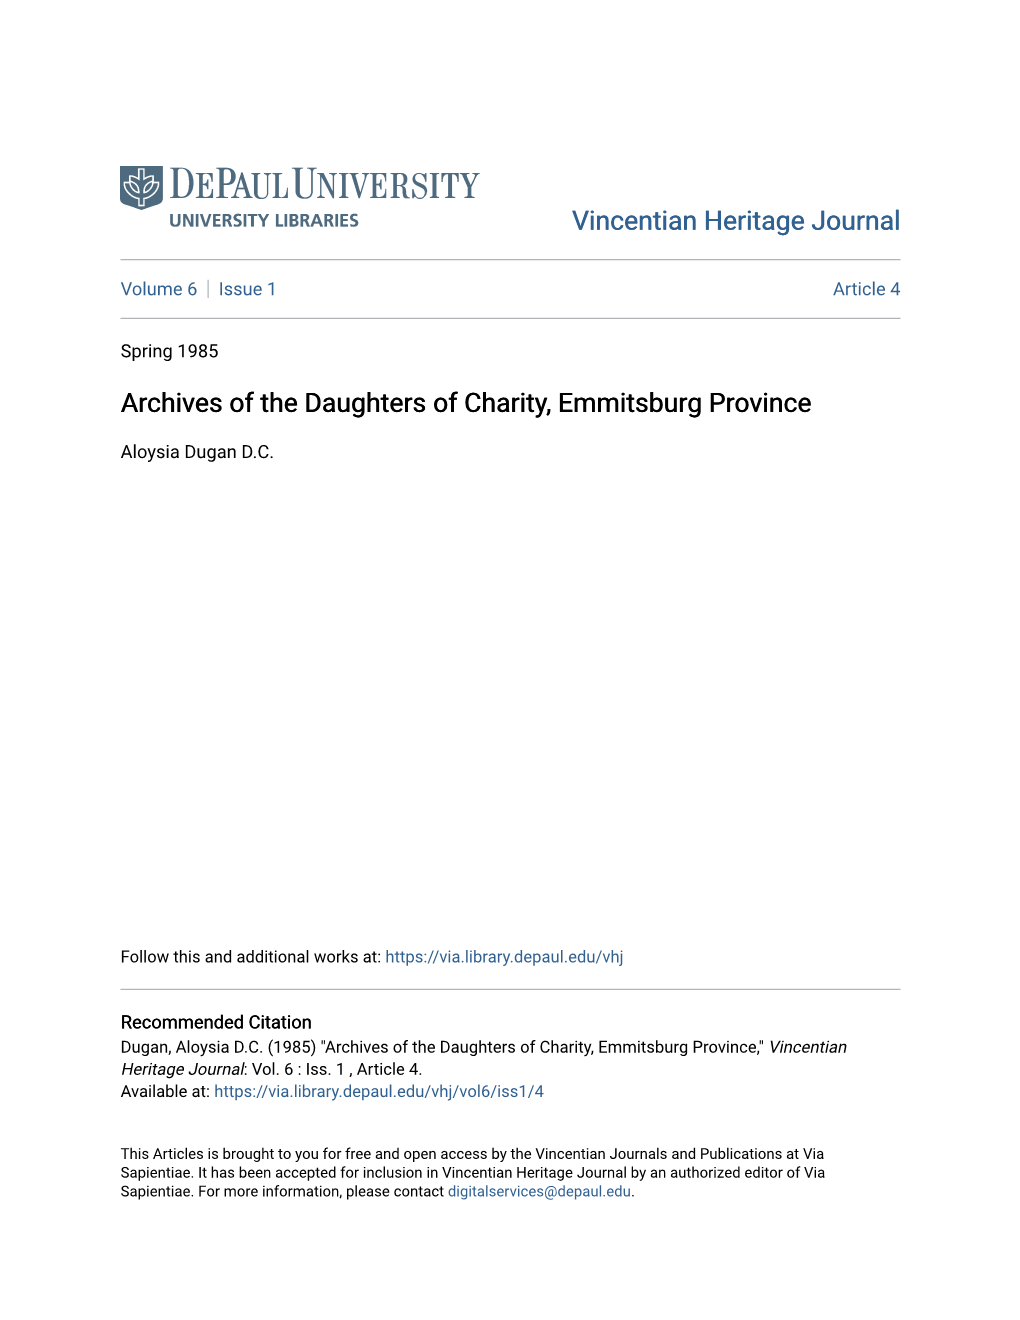 Archives of the Daughters of Charity, Emmitsburg Province